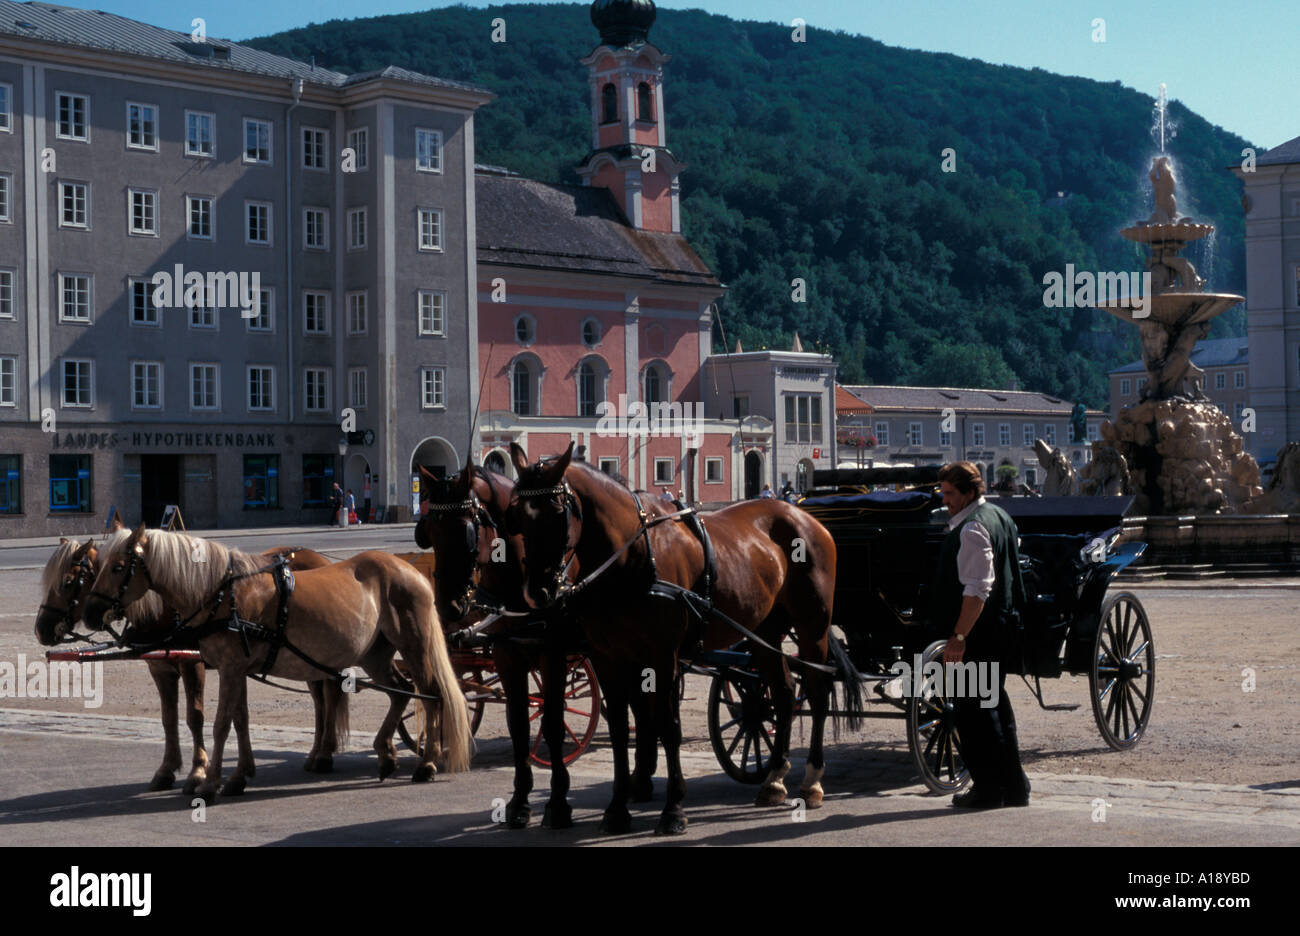 Horse drawn carriages waiting in Residenzplats Saltzburg Austria Stock Photo